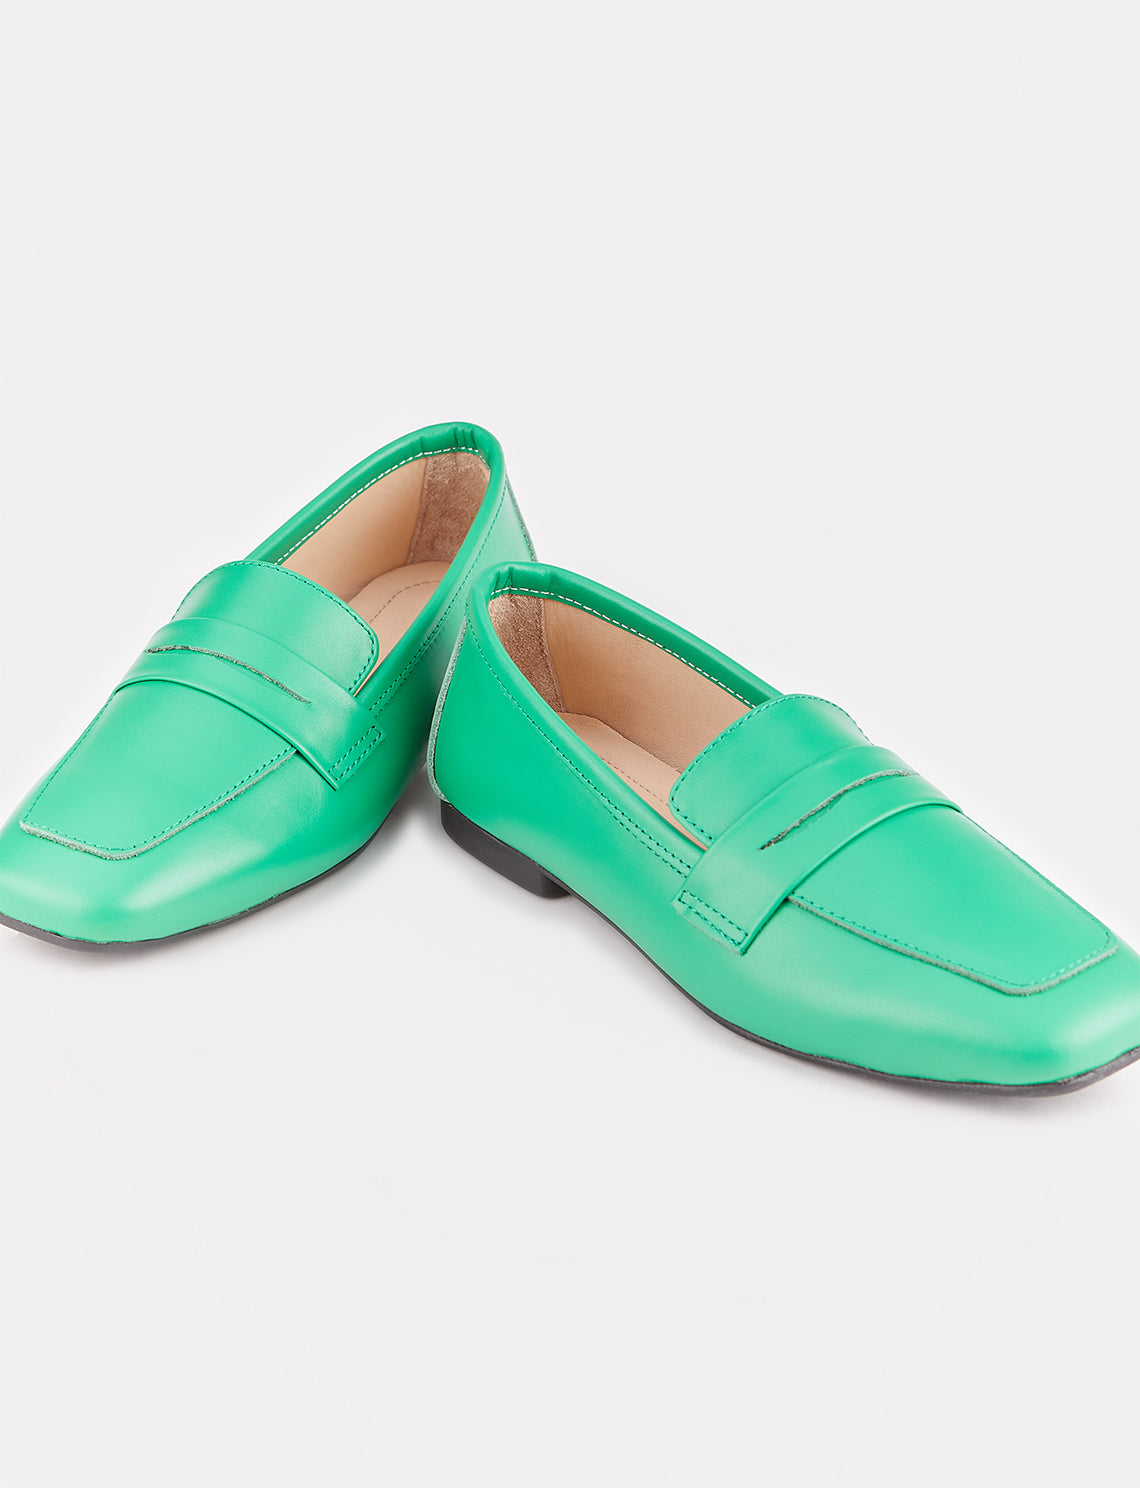 Women Green Genuine Leather Square Toe Flat Shoes